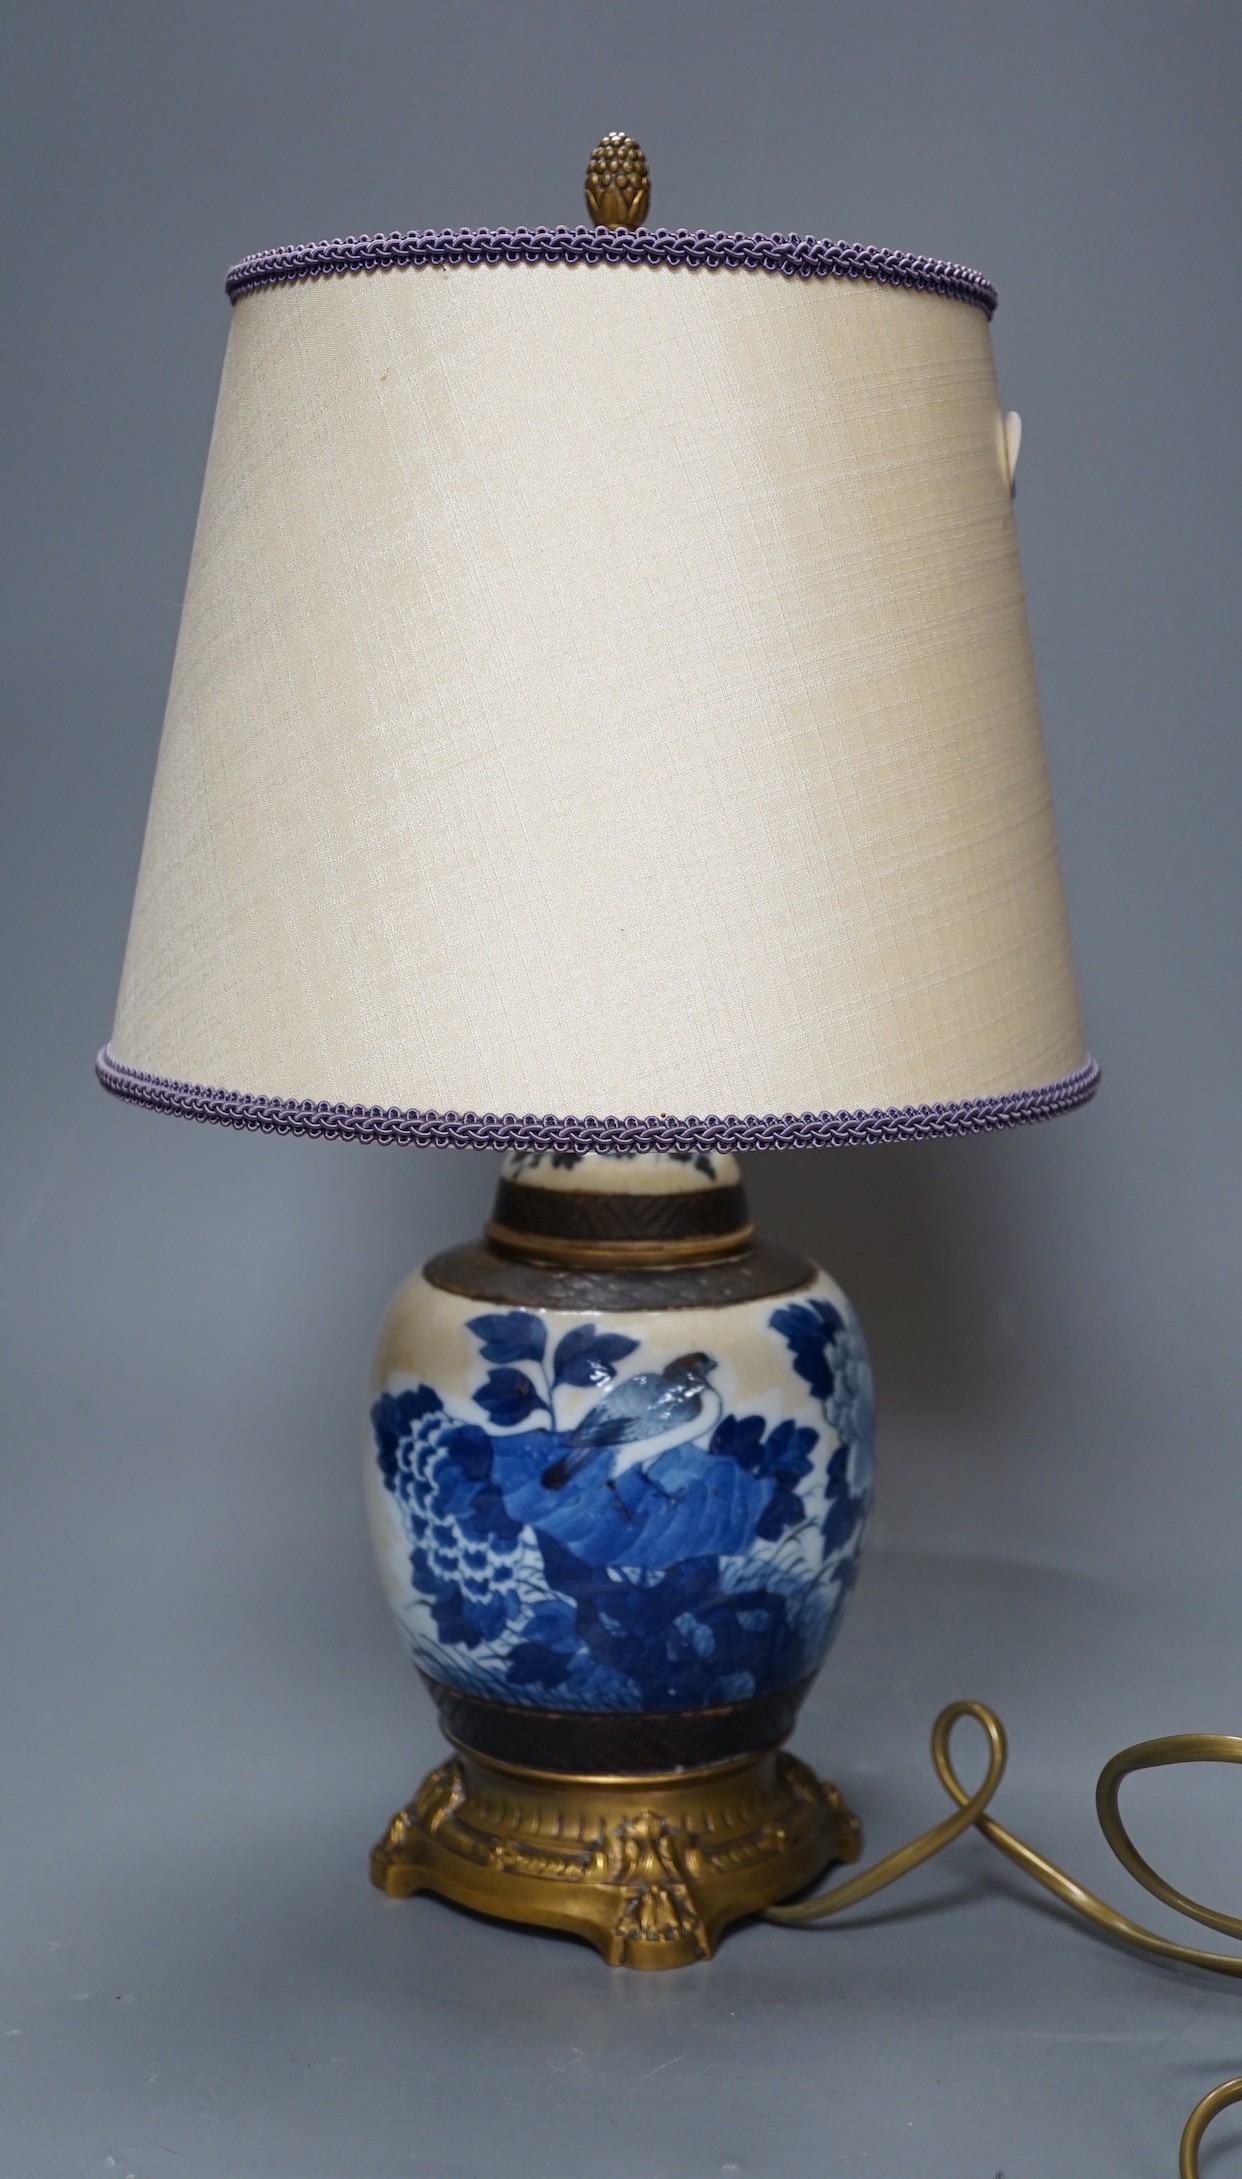 A late 19th century Chinese blue and white crackle glaze jar, now mounted as a lamp, total height 38cm